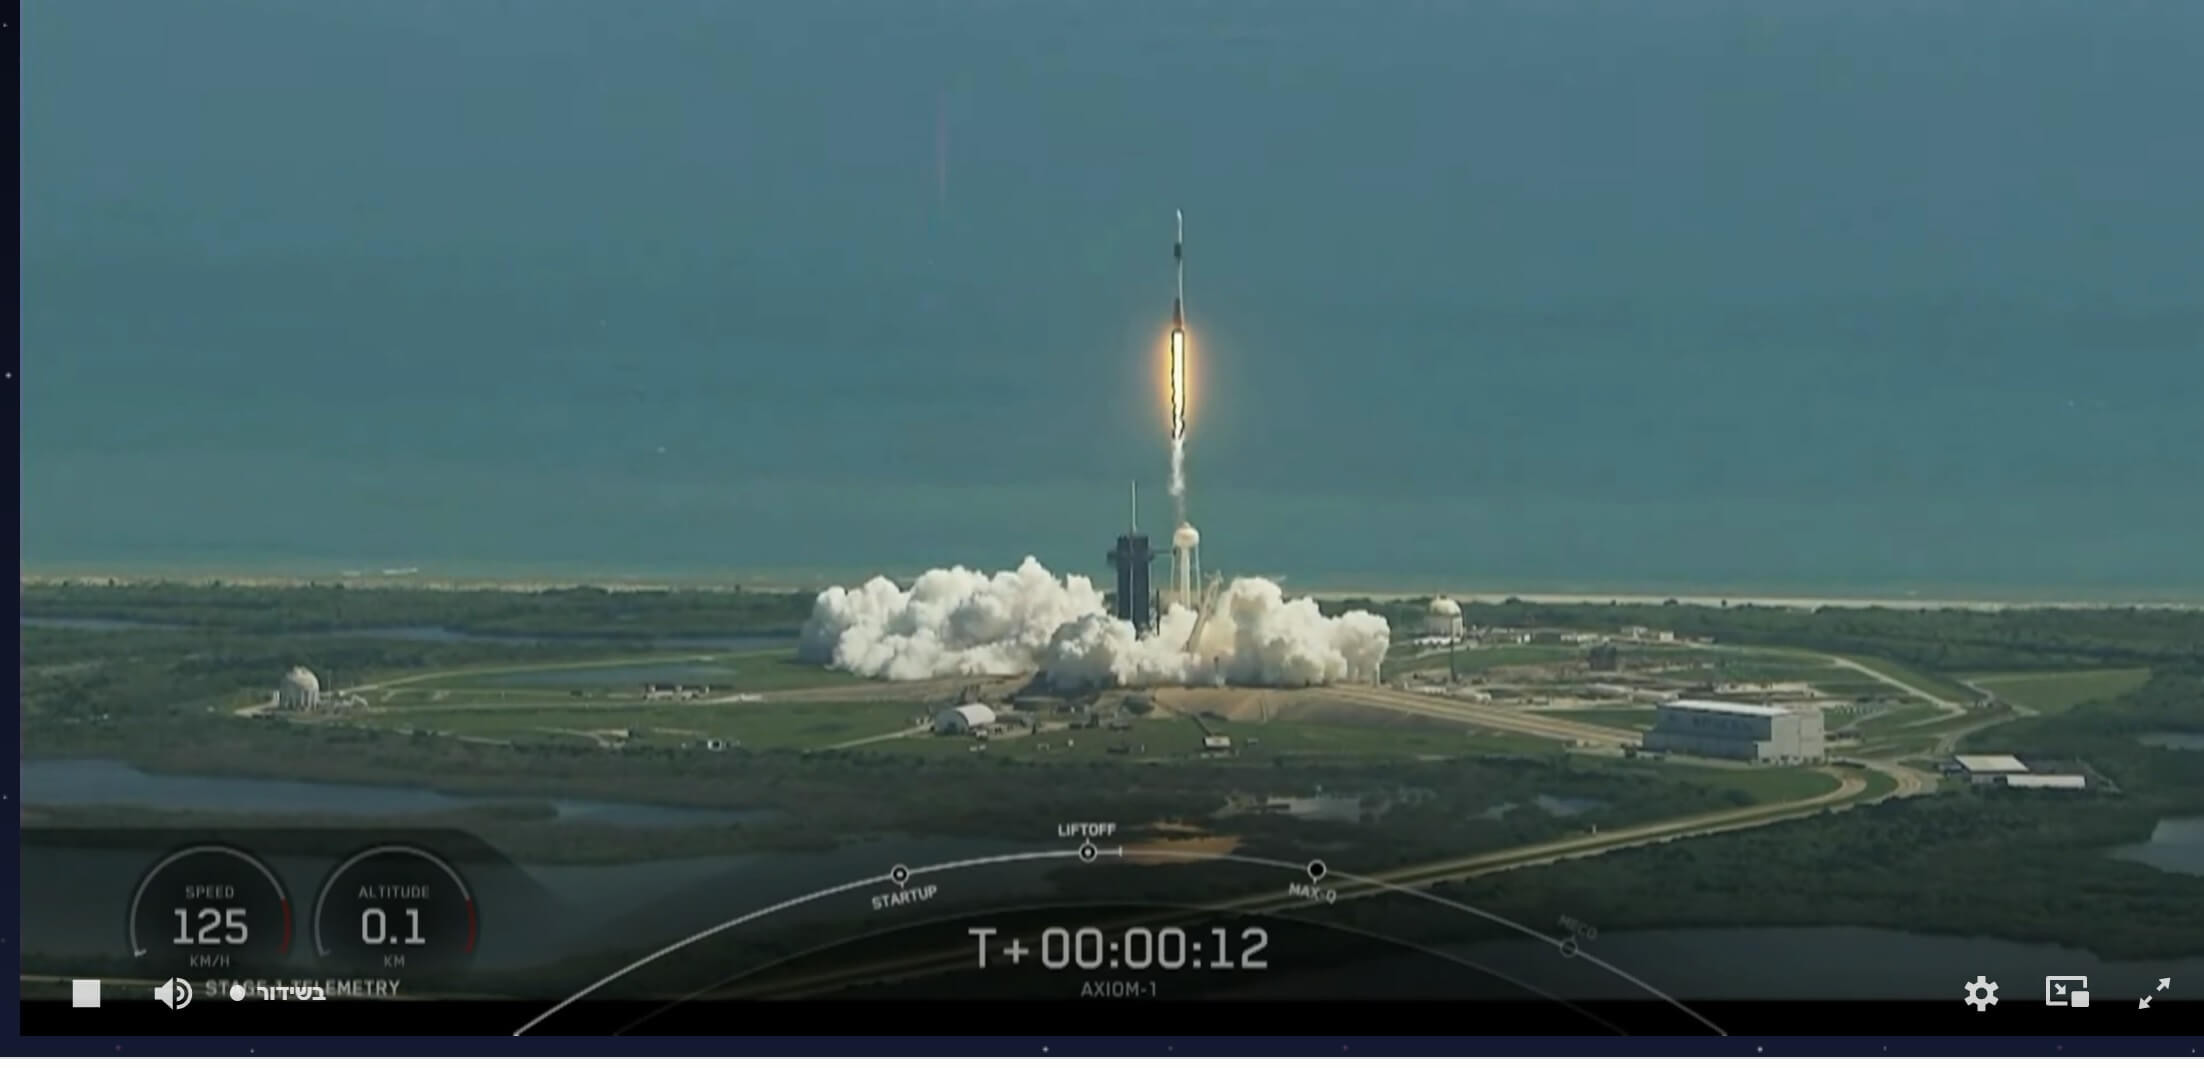 The launch of the Endeavor crew Dragon spacecraft on a Falcon 9 launcher for the AX-1 private mission in which the Israeli Eitan Stiva also participates. Screenshot from Axiom's broadcast